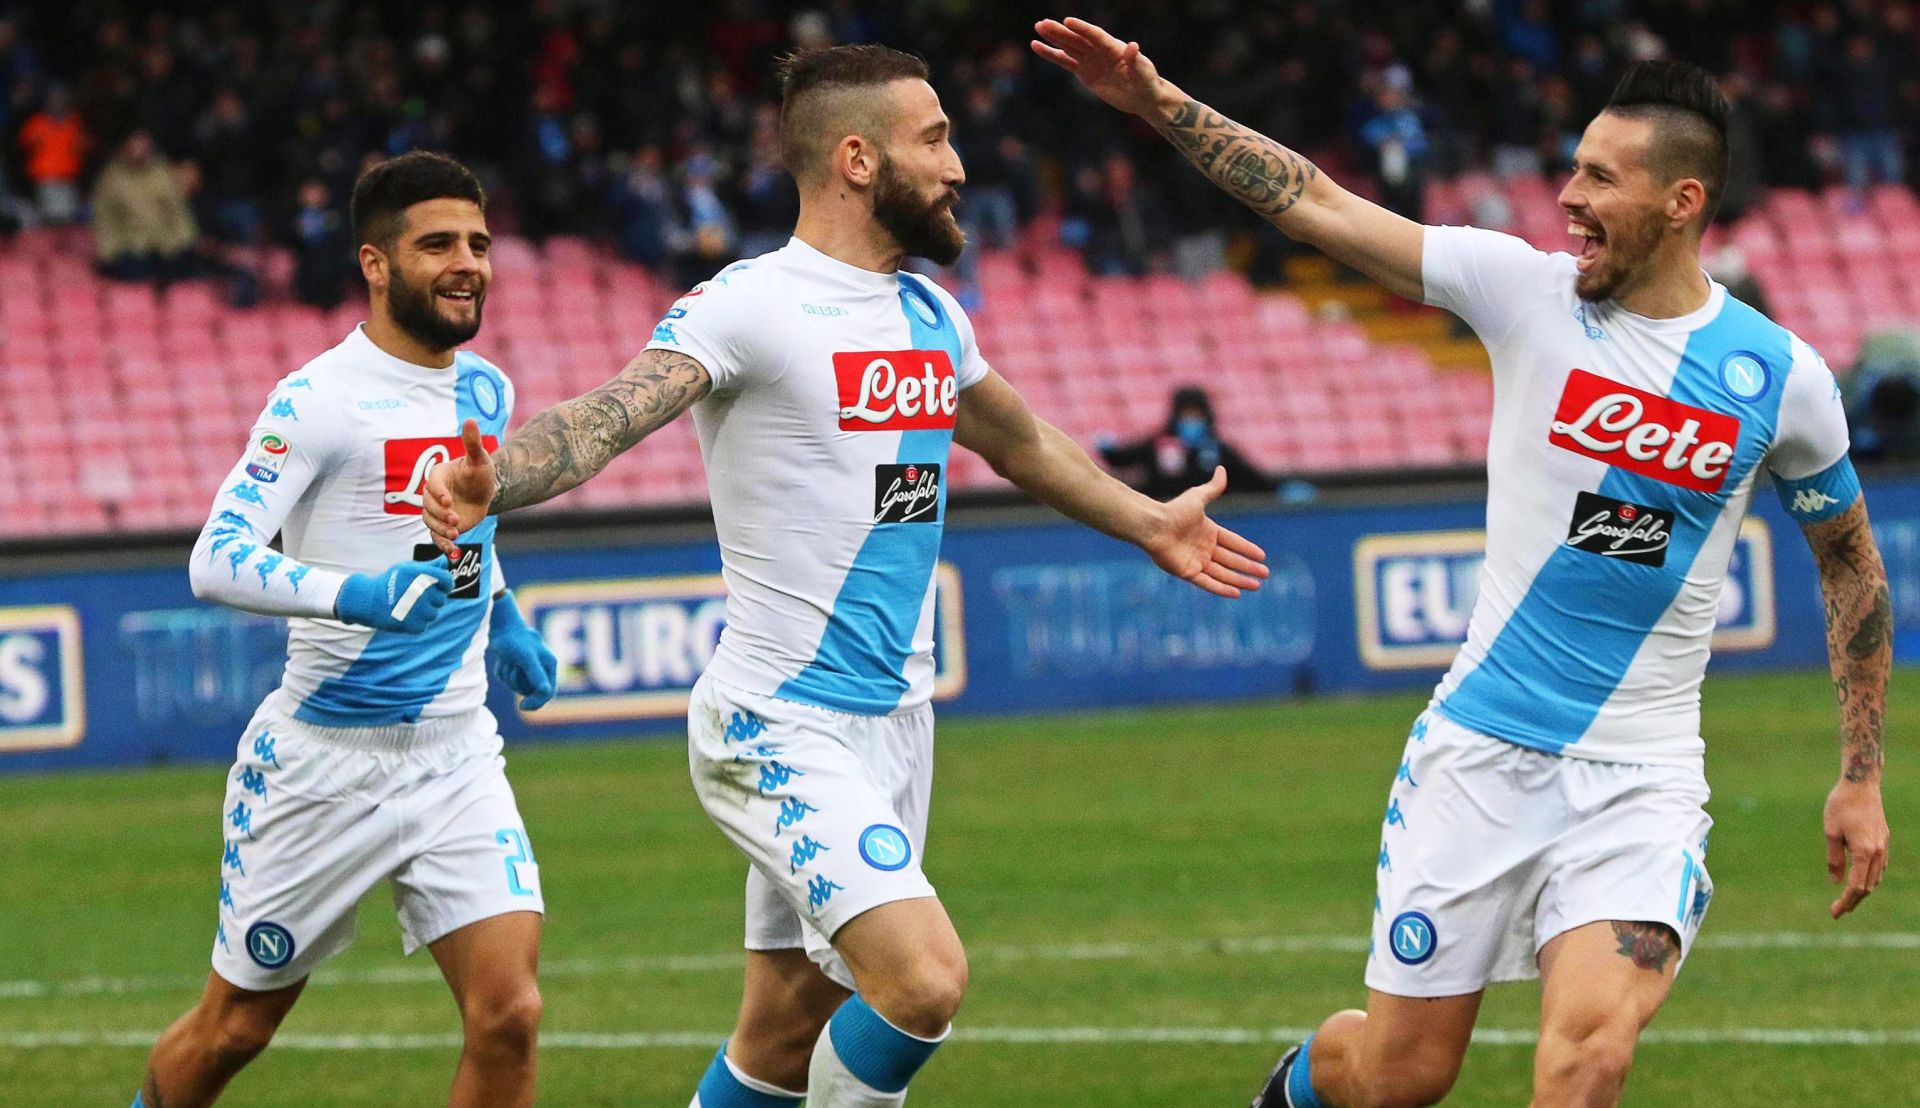 epa05719153 Napoli's defender Lorenzo Tonelli (C) celebrates with his teammate Marek Hamsik (R) after scoring the 1-0 lead during the Italian Serie A soccer match between SSC Napoli and Pescara Calcio at San Paolo stadium in Naples, Italy, 15 January 2017.  EPA/CESARE ABBATE